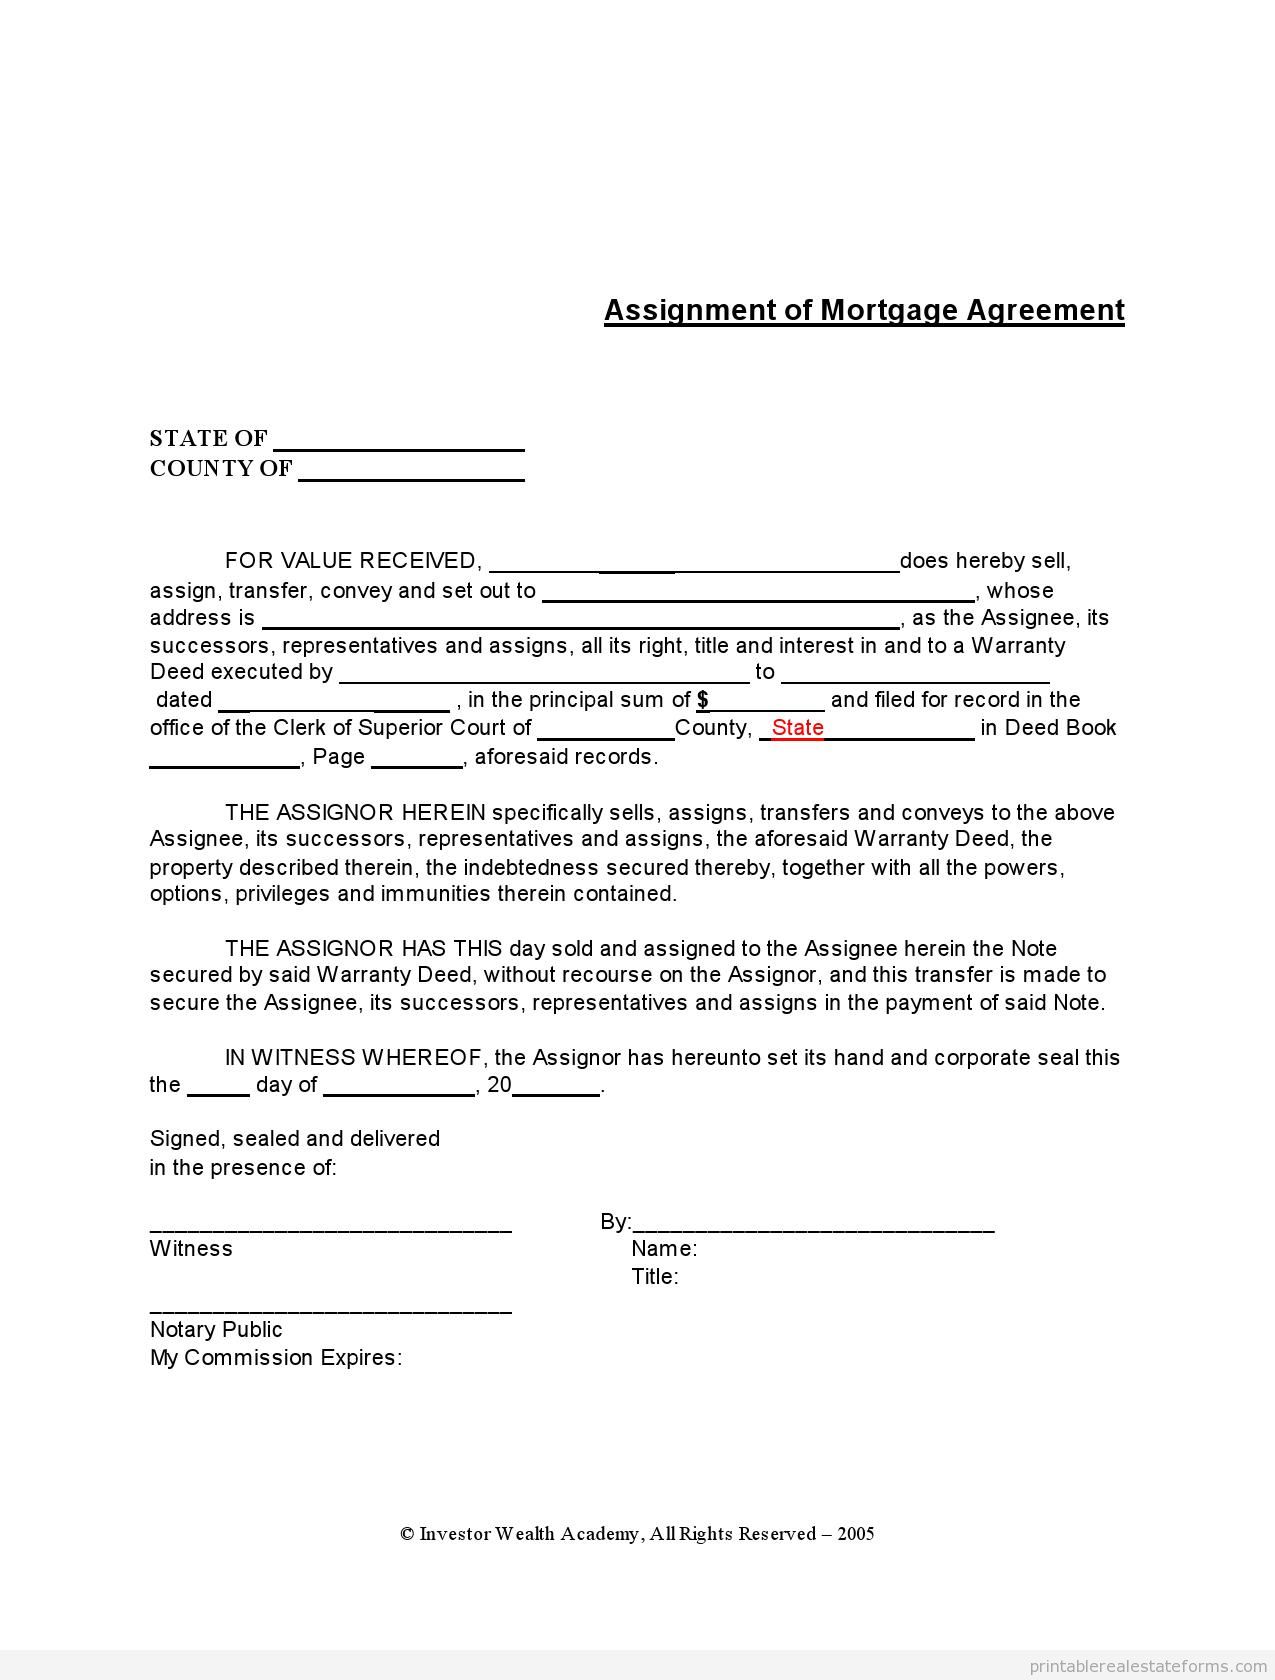 assignment of mortgage foreclosure